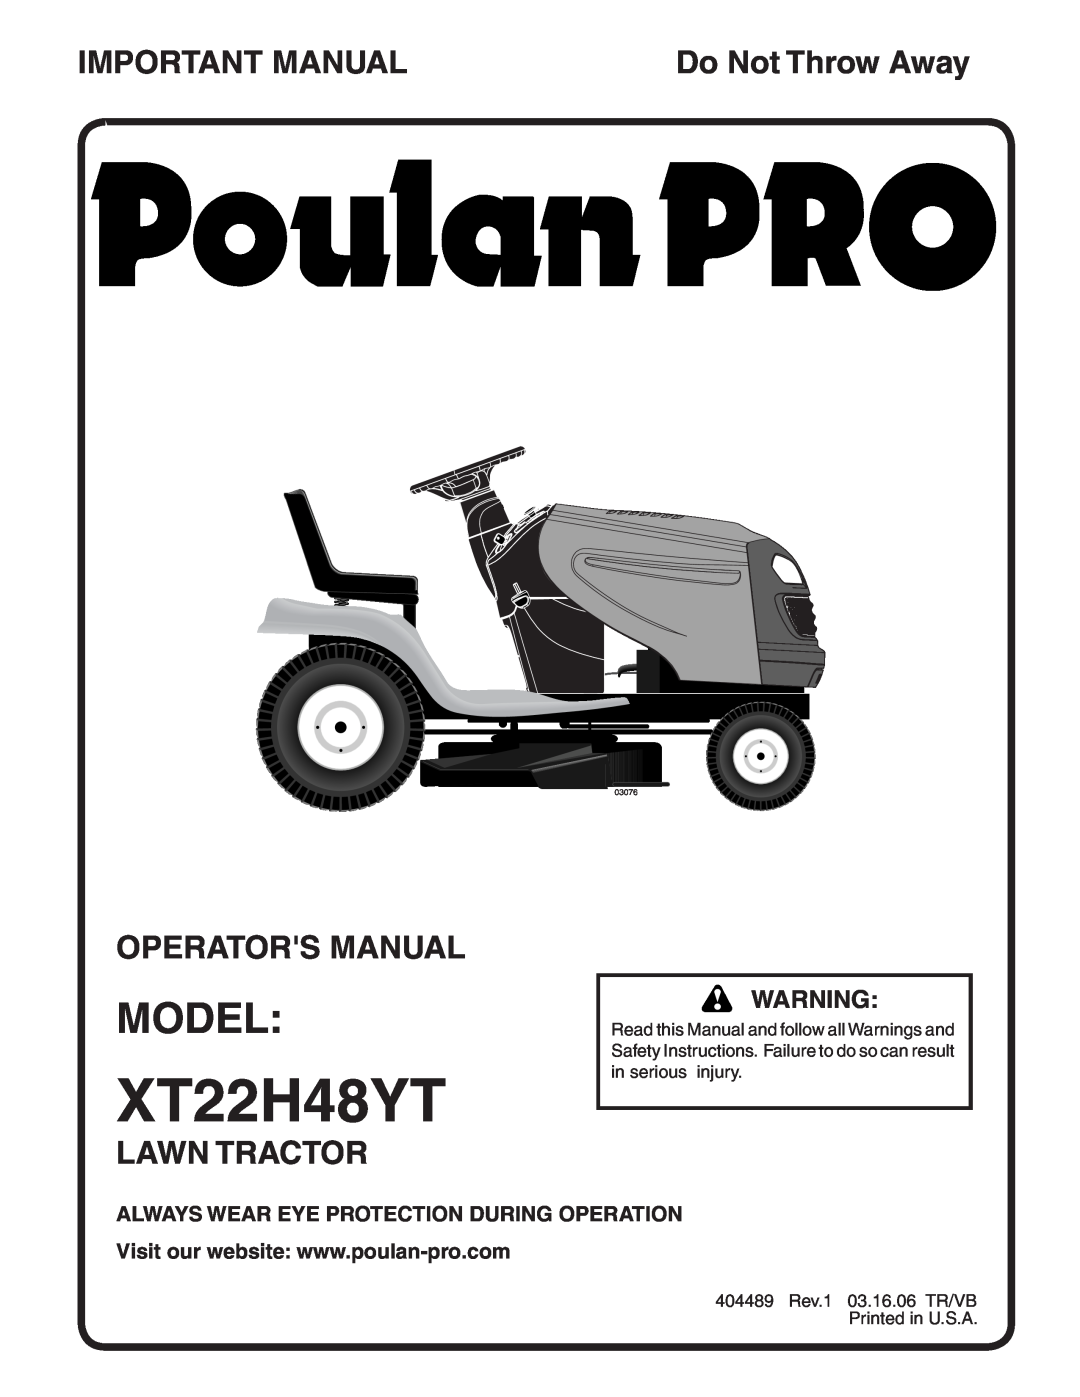 Poulan 404489 manual Model, Important Manual, Operators Manual, Lawn Tractor, Always Wear Eye Protection During Operation 